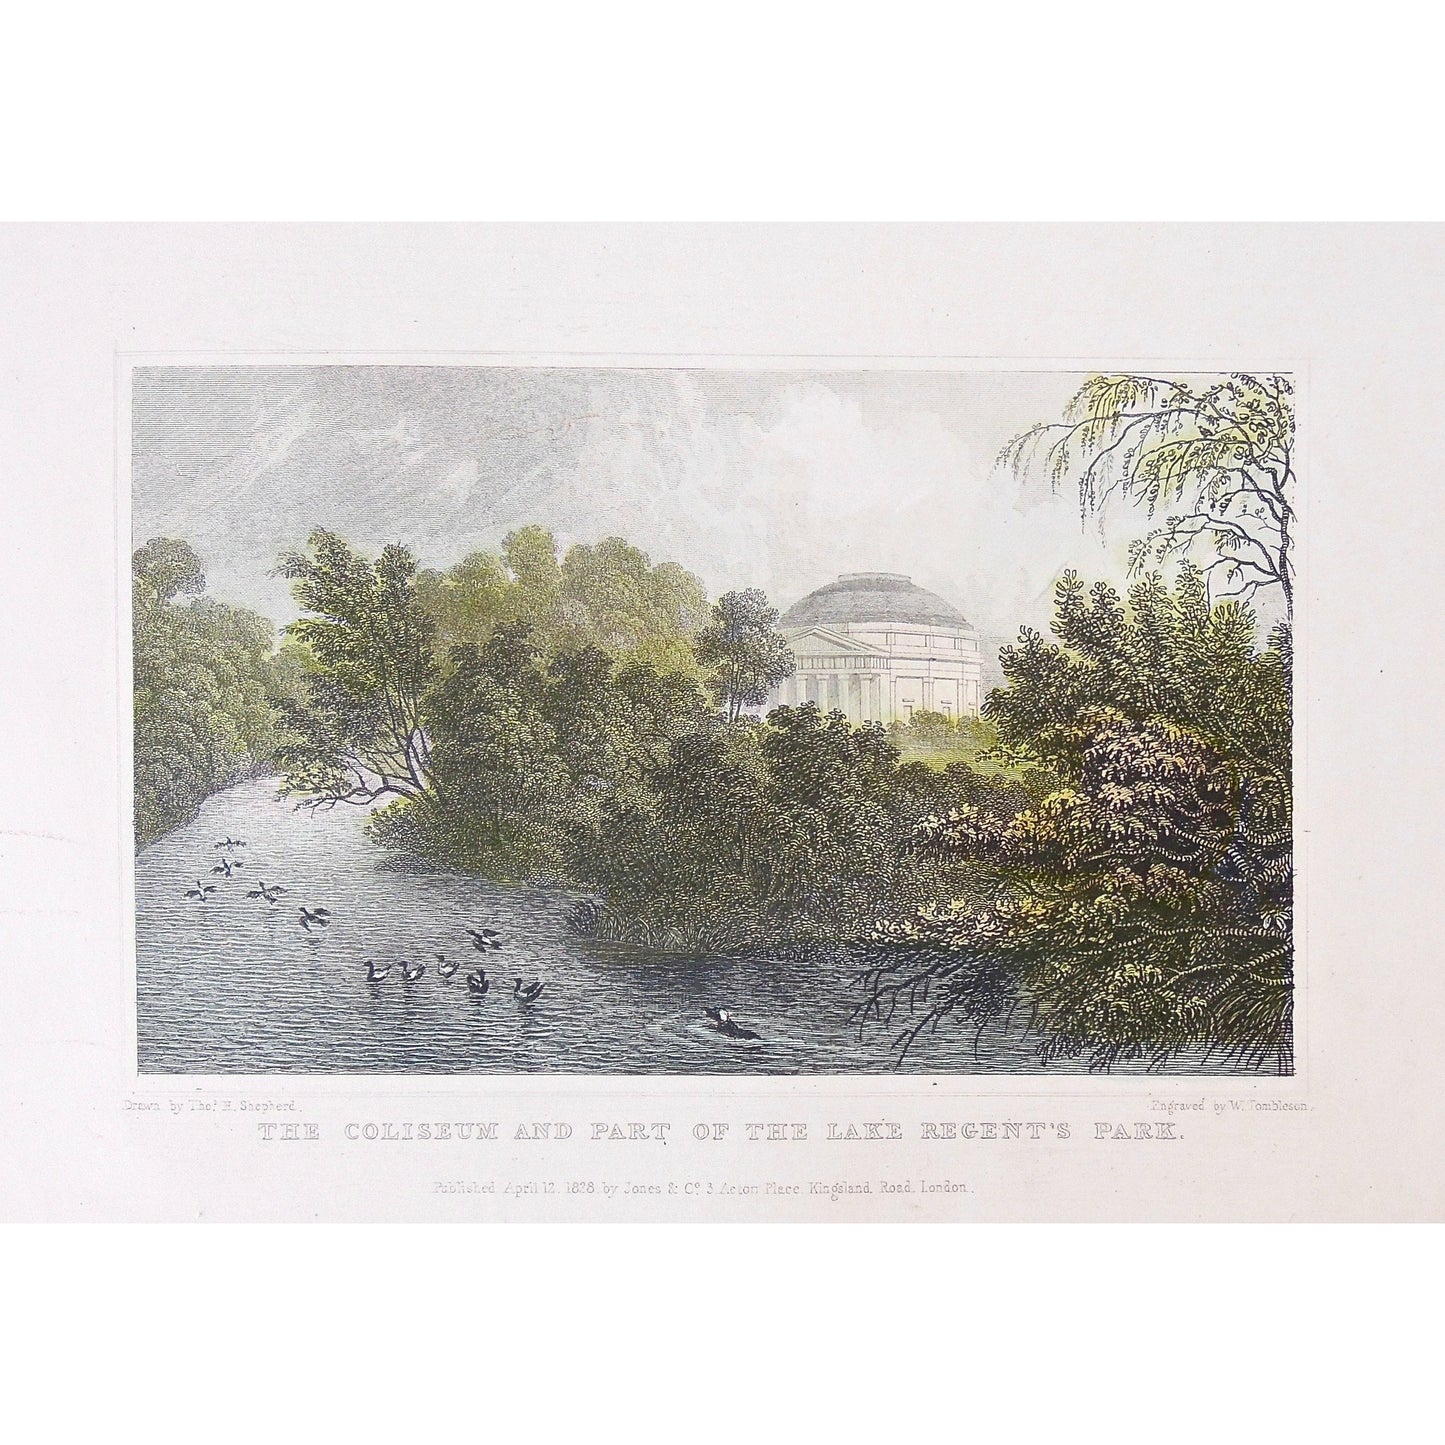 An Island of the Lake & Part of Cornwall & Clarence Terrace, Regent's Park.  (S2-32a)